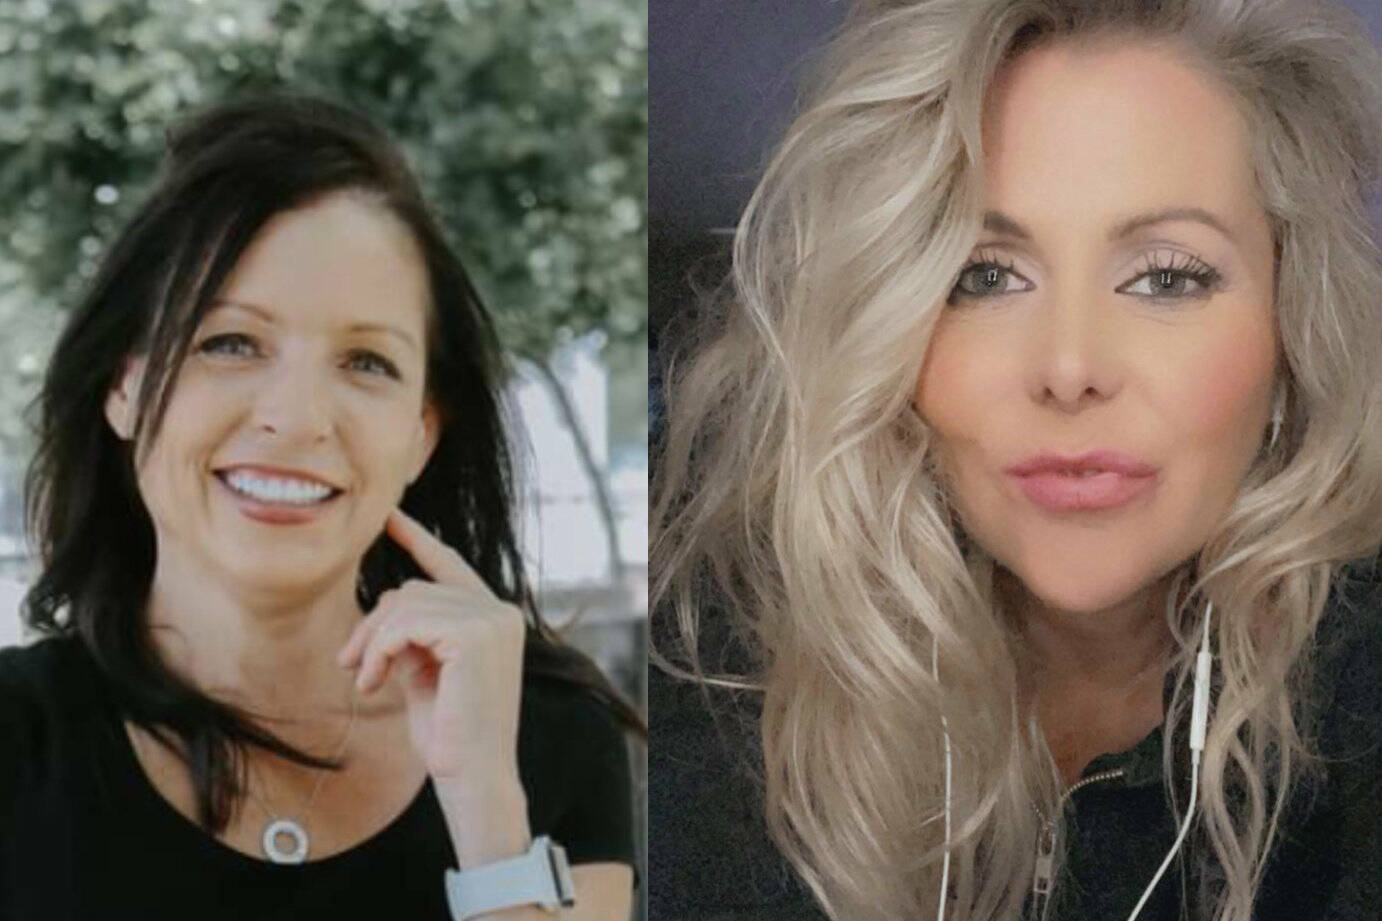 Mimi Kates (left) and Amber Culley (right) were killed by Eric Shestalo in Chilliwack on July 21, 2022. Shestalo was later found dead from a self-inflicted gunshot wound. (Facebook photos)